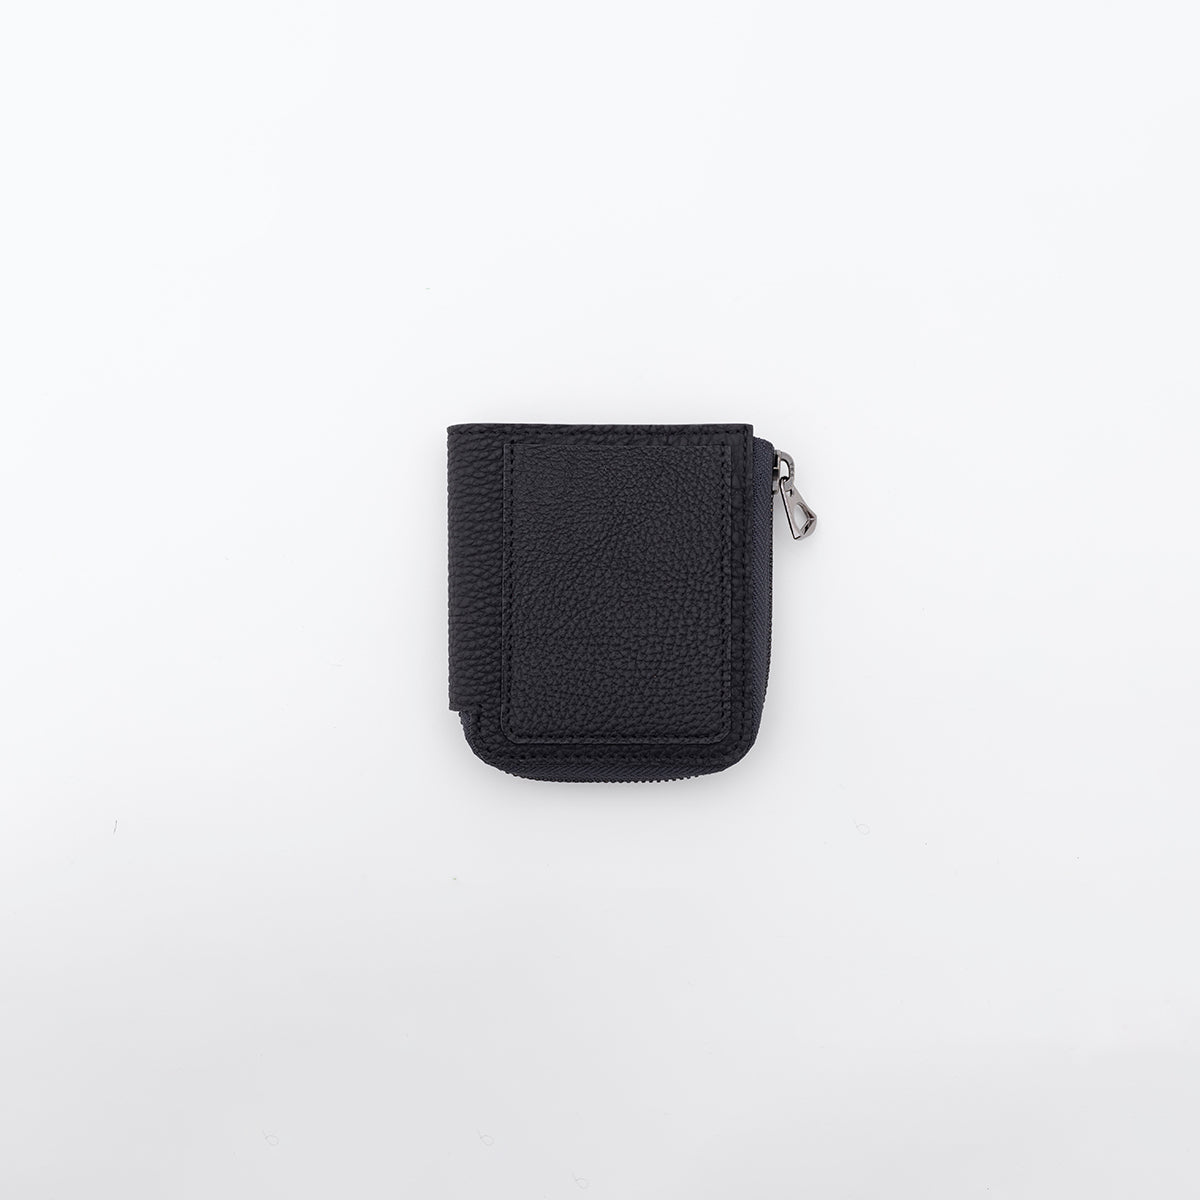 ITTI (イッチ) | CRISTY VERY COMPACT WLT.5 / BK COLLECTION ...